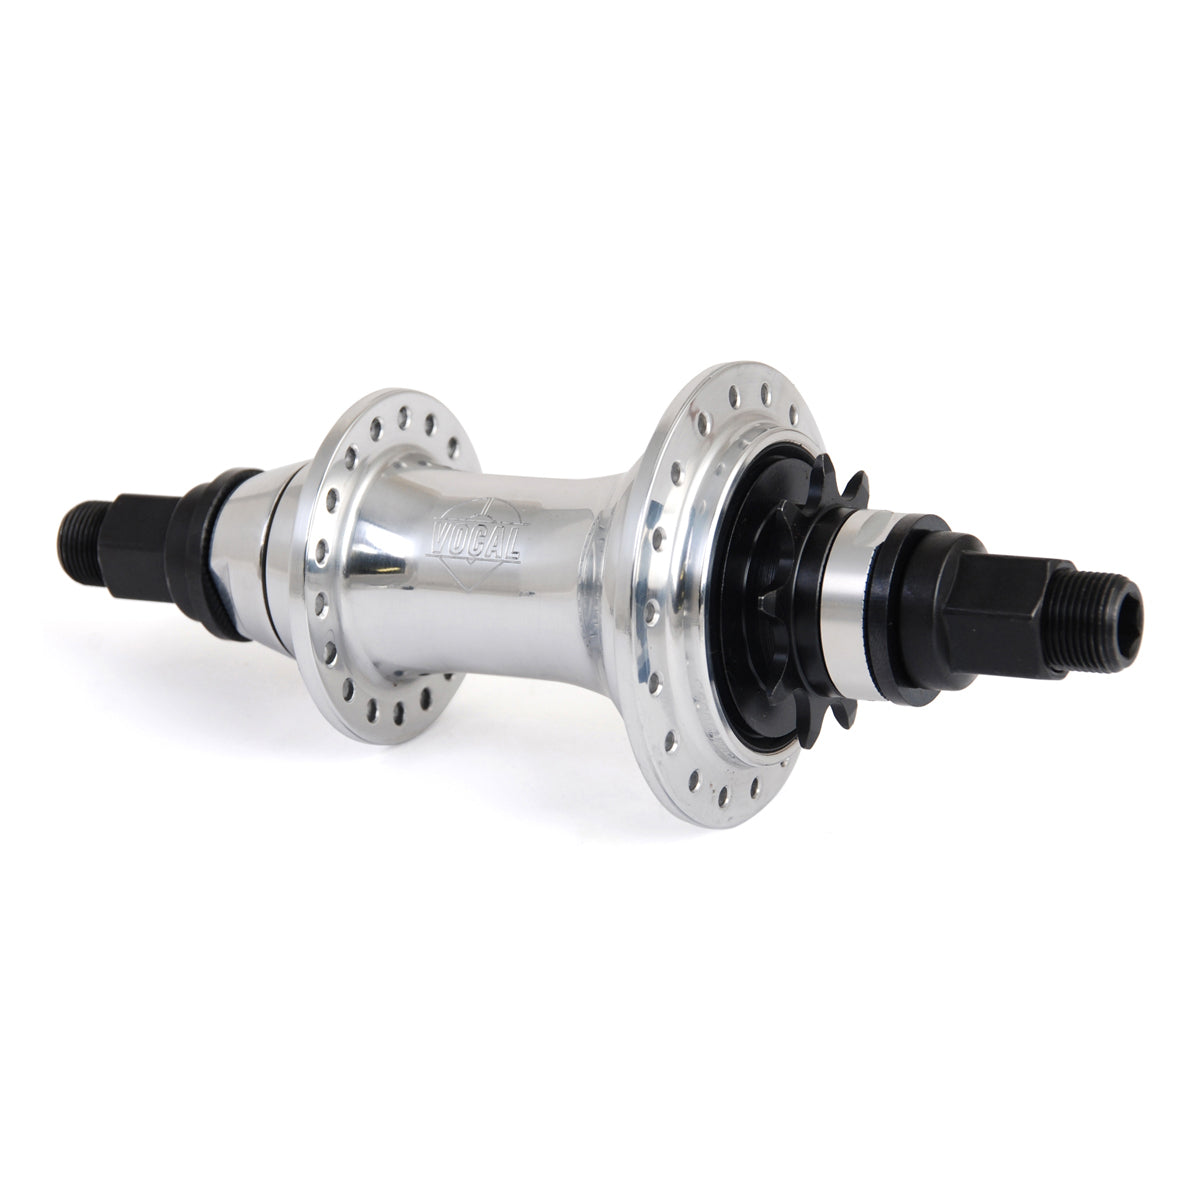 Vocal Hitchhiker Freecoaster/Cassette Rear Hub